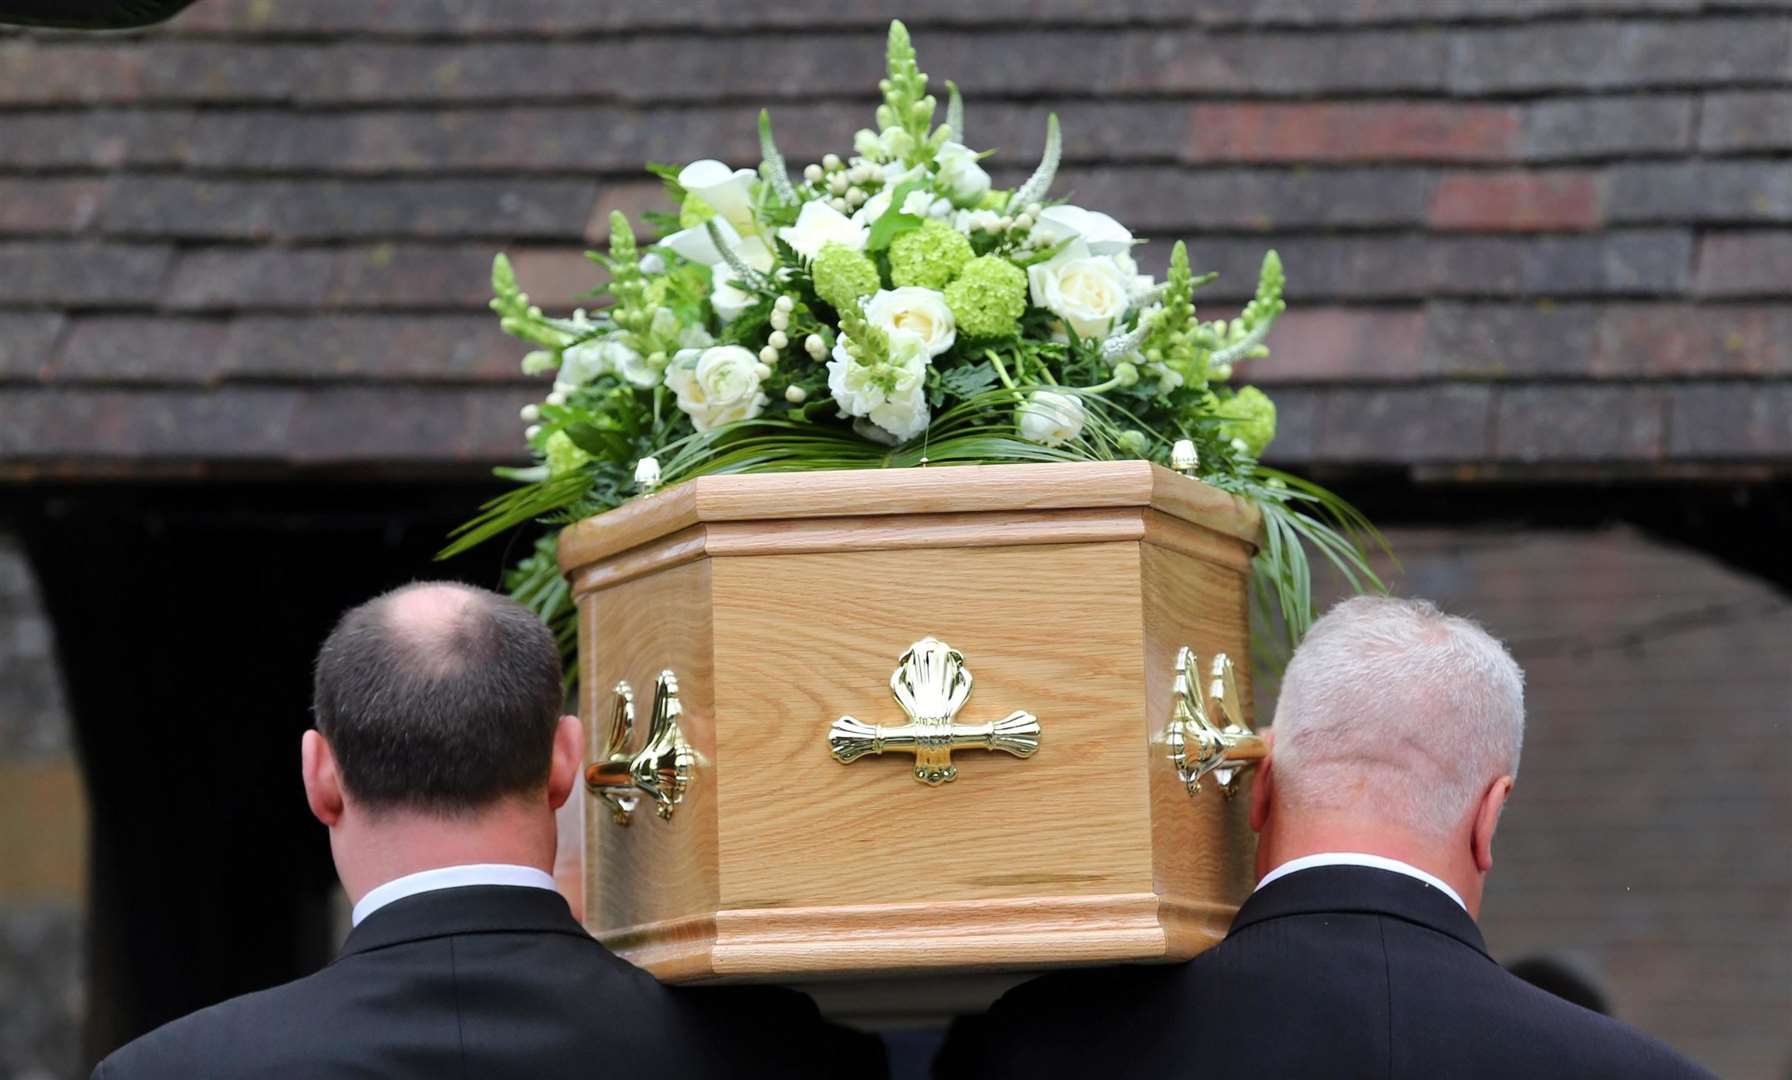 Funeral directors have seen an increase in business